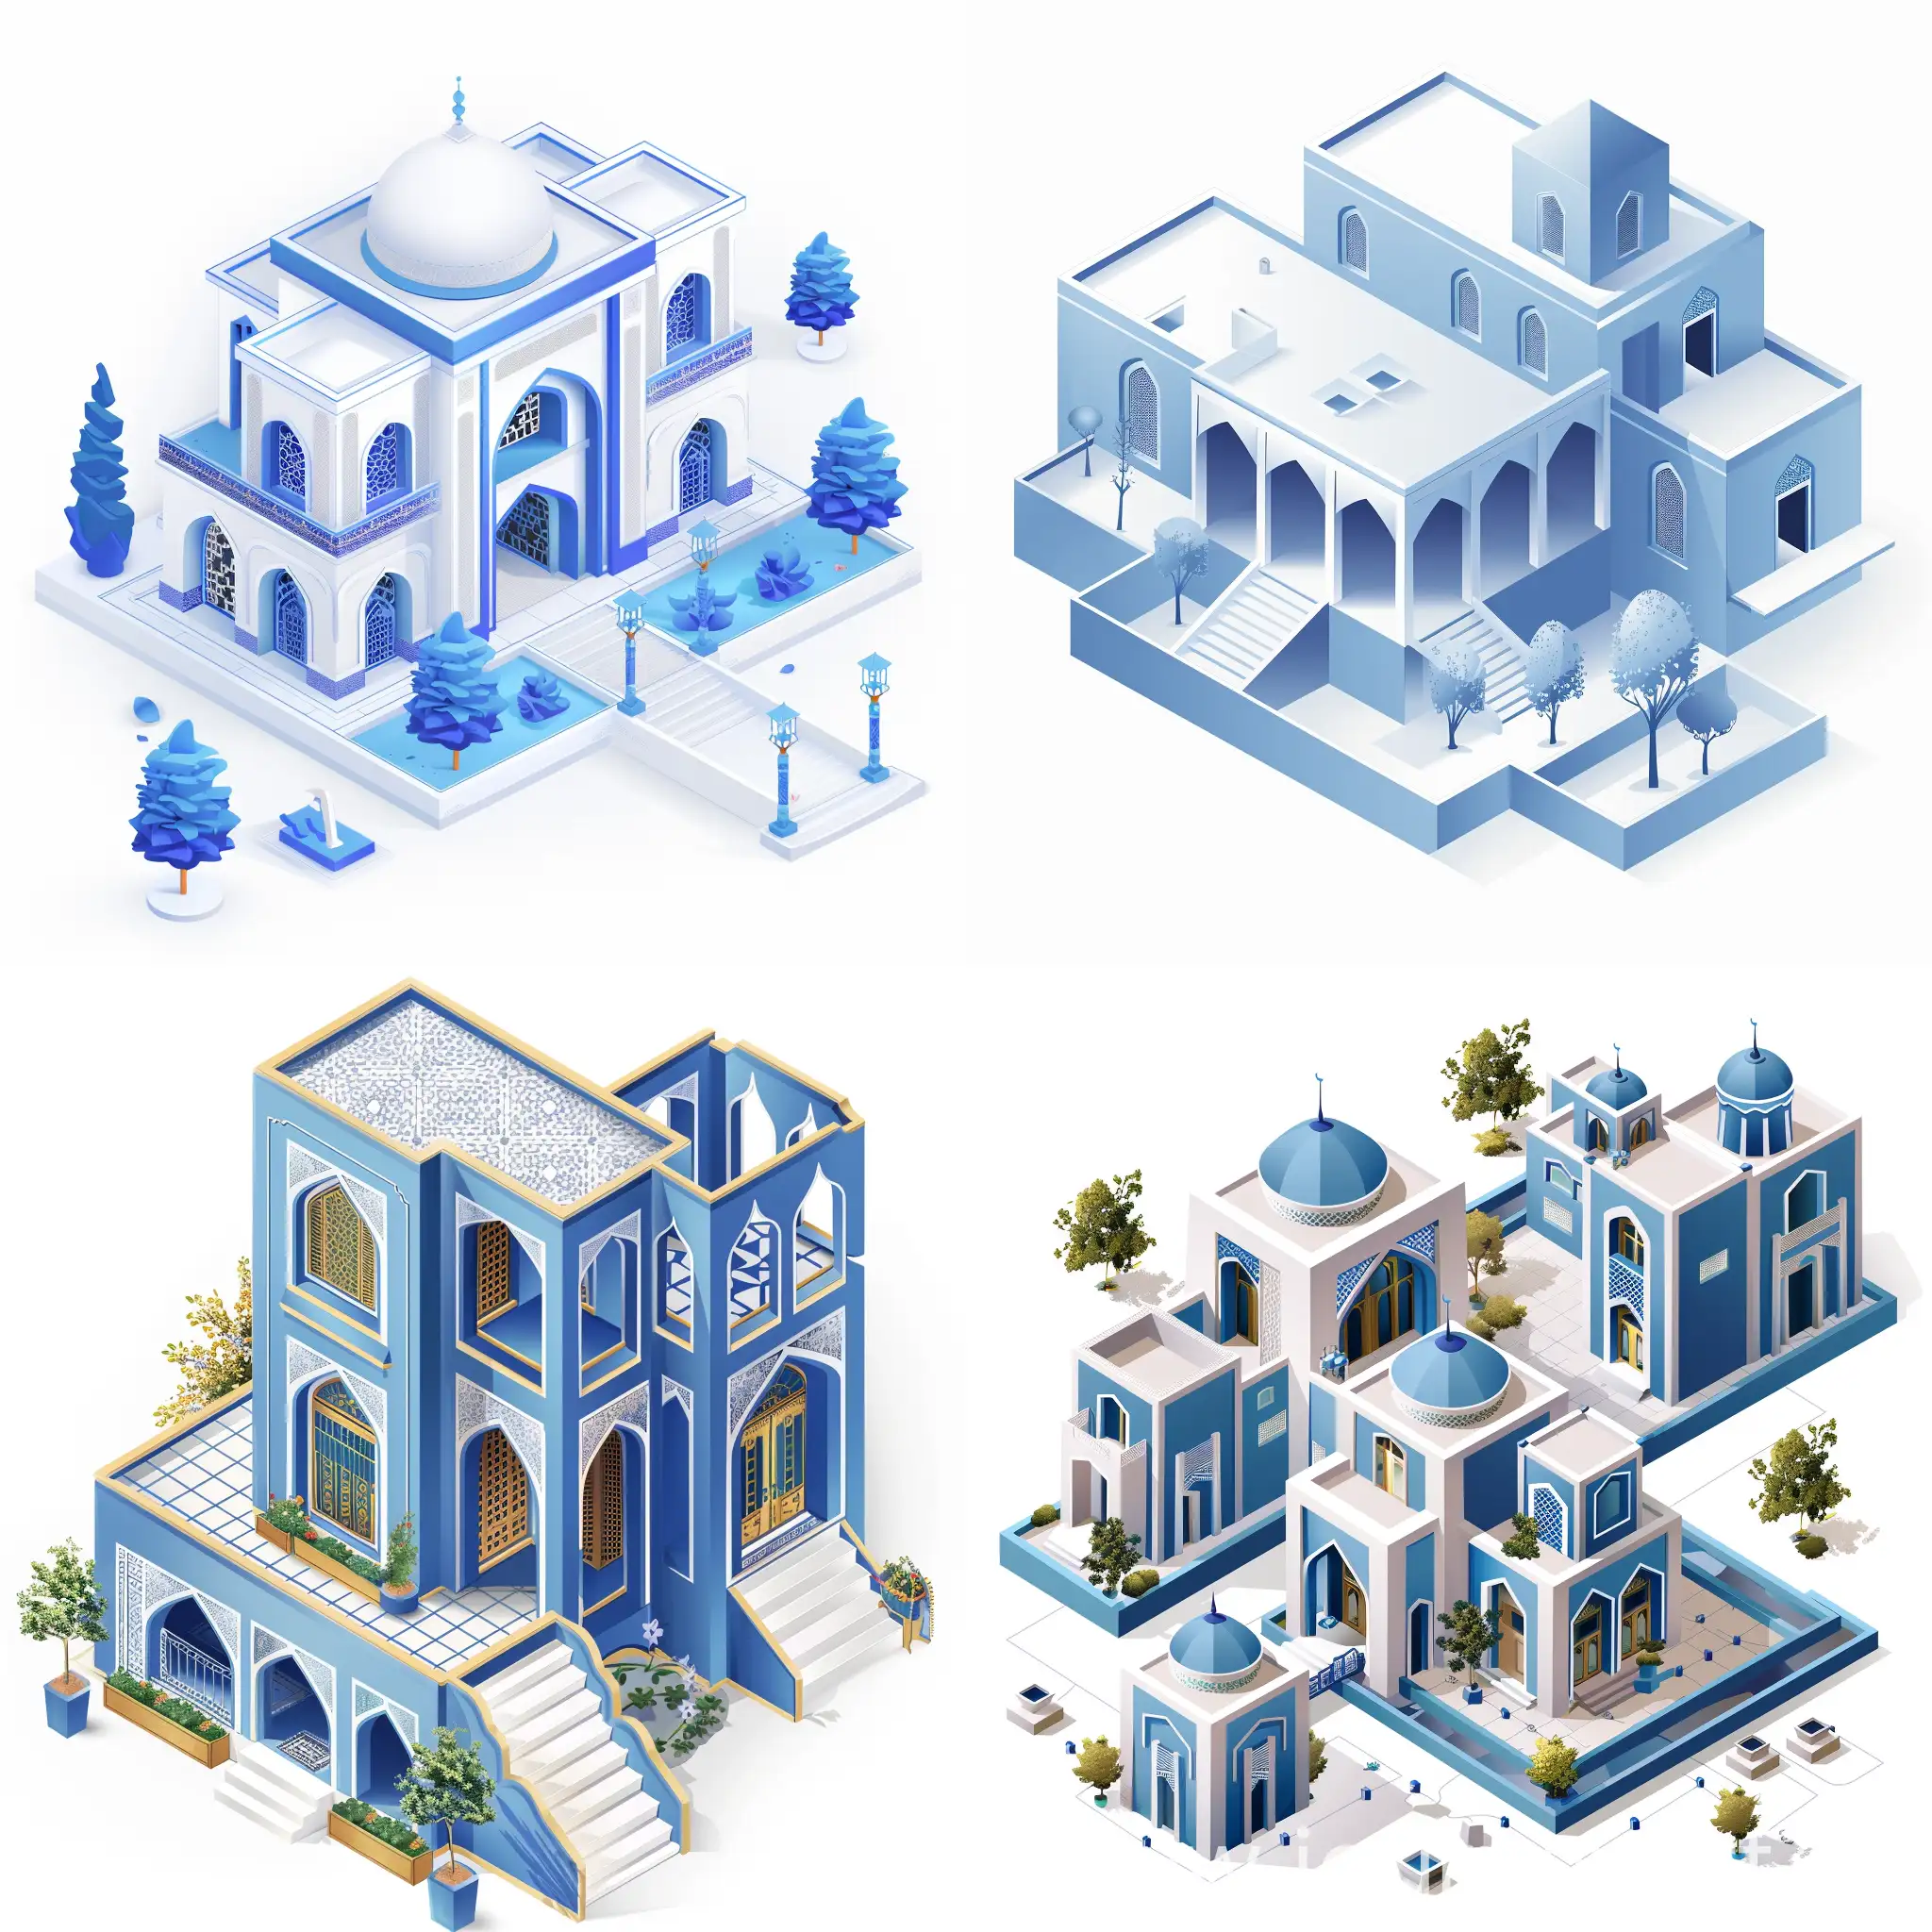 Persian-Historical-Architecture-Meets-Modern-Residential-Design-in-Isometric-2D-Illustration